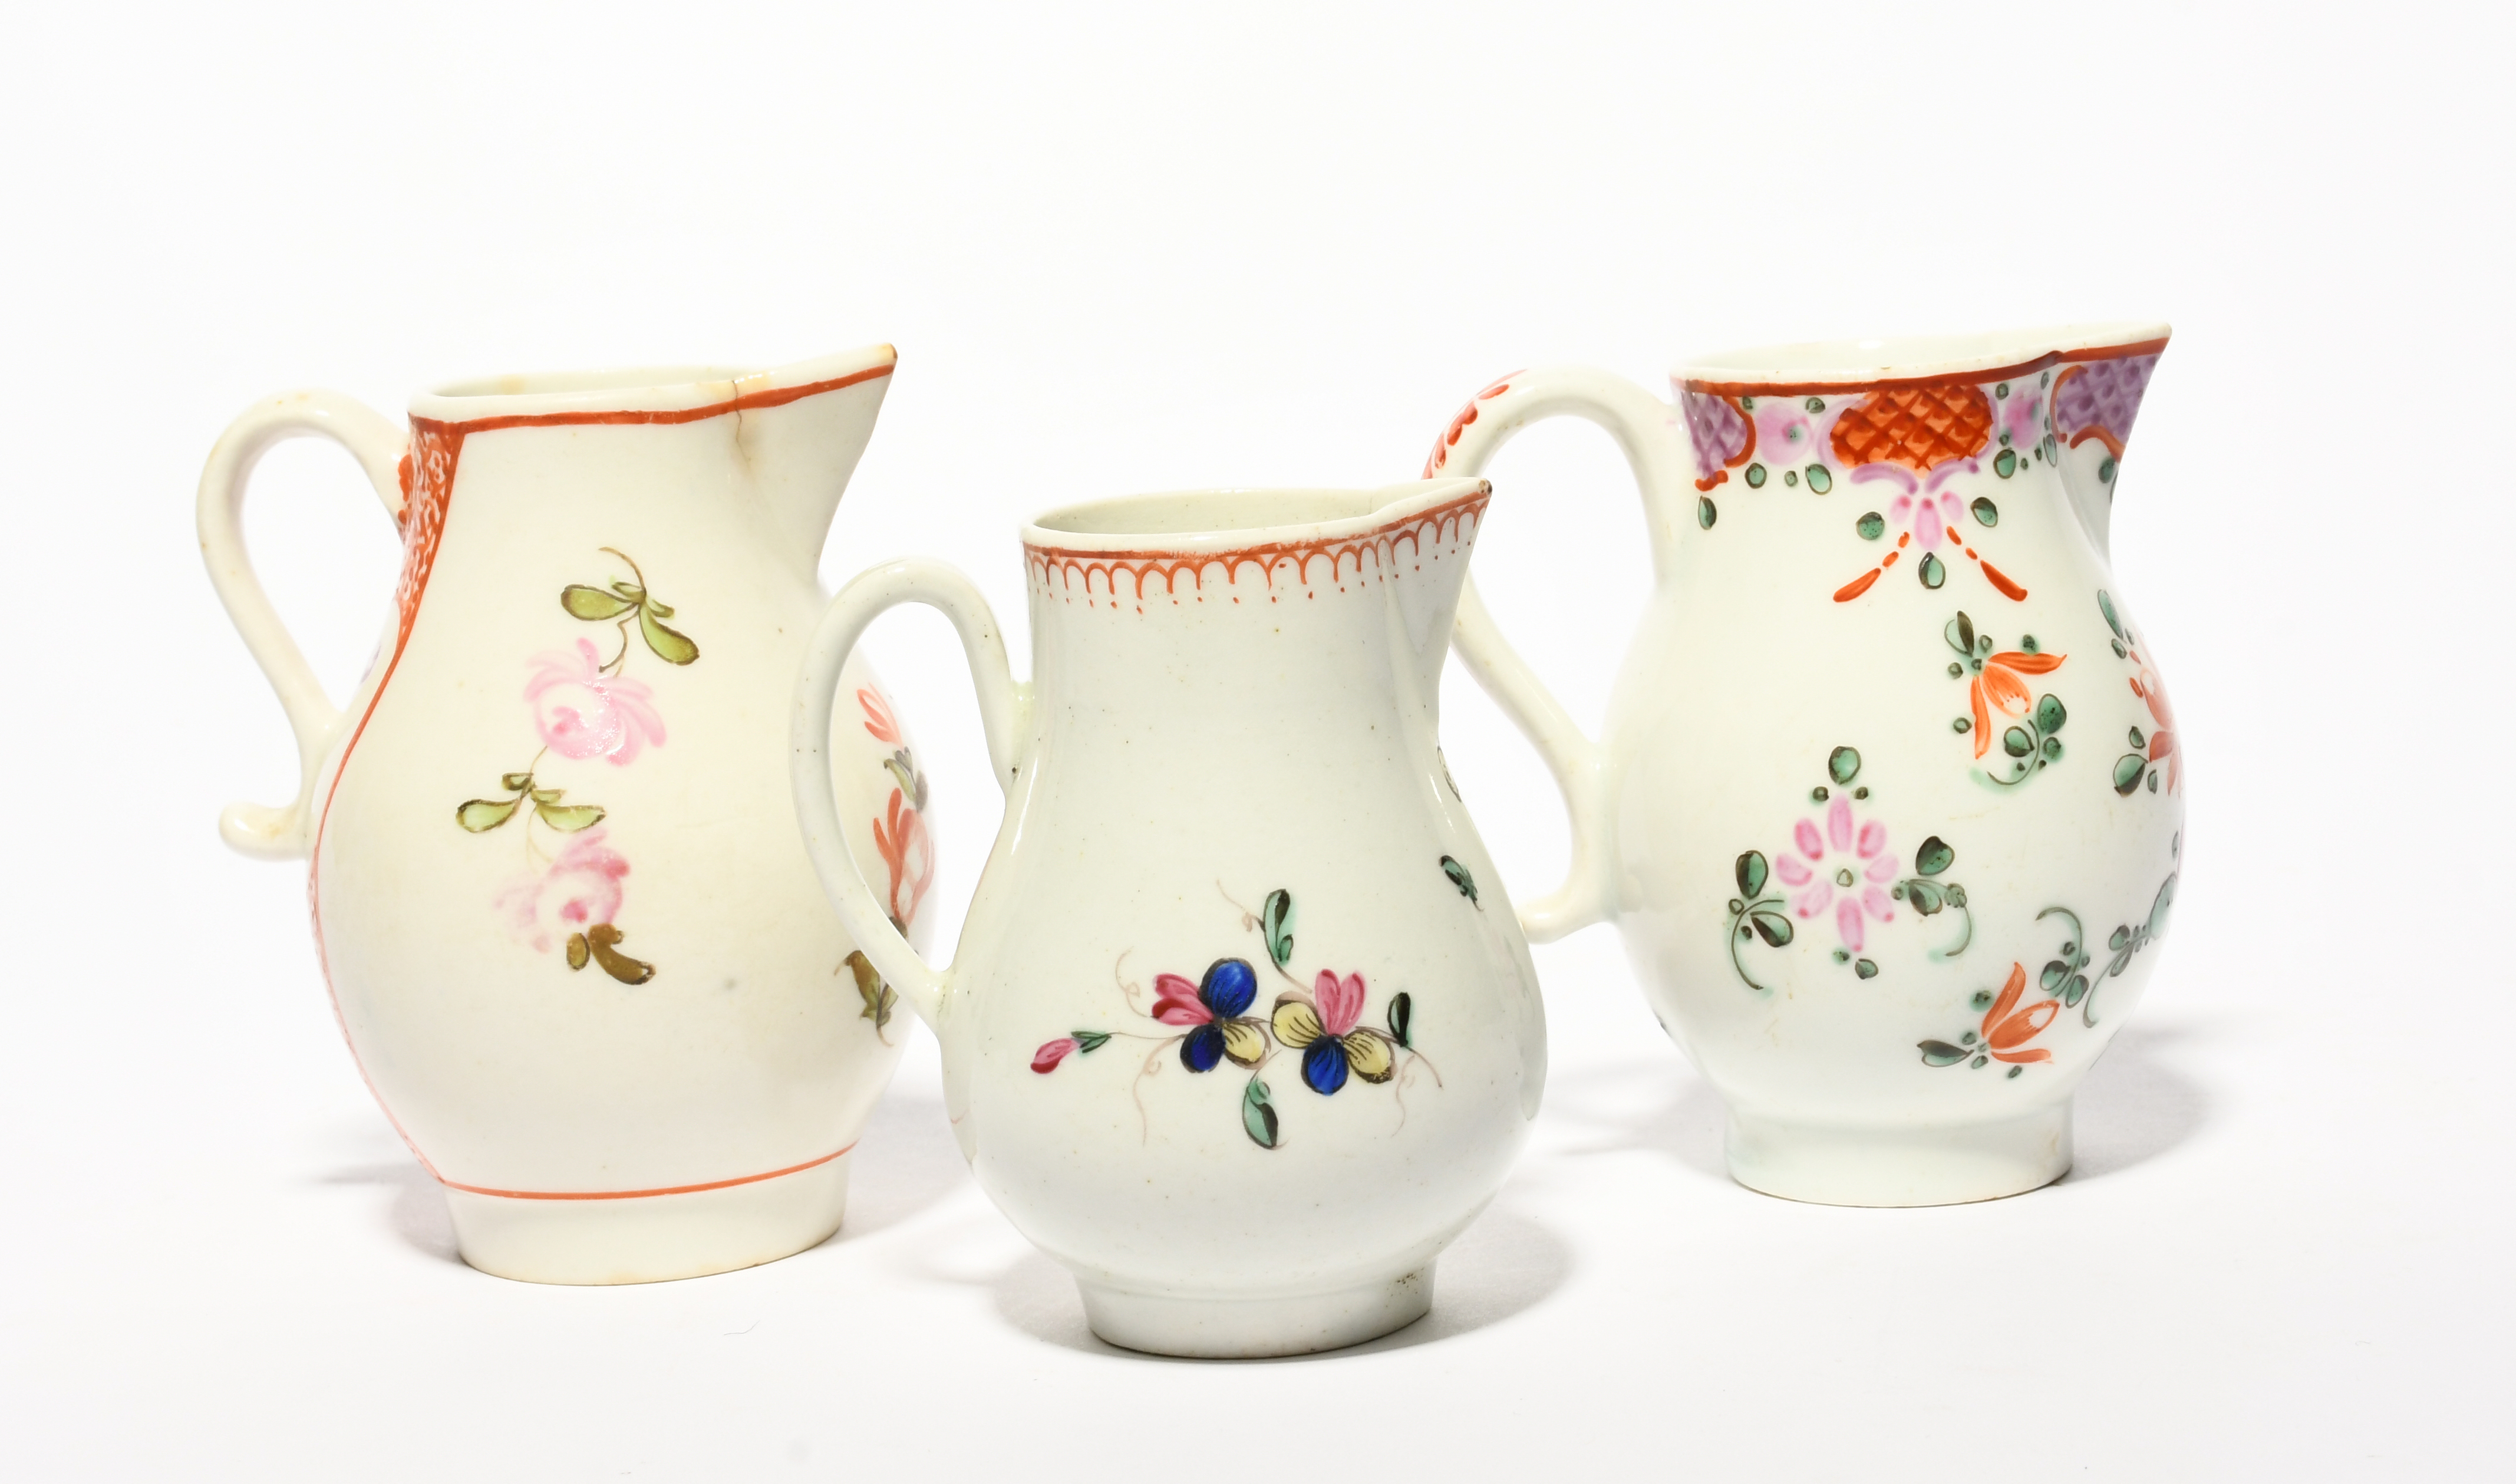 Three English porcelain milk jugs, c.1770-90, two Lowestoft and painted with flowers and trellis - Image 2 of 2